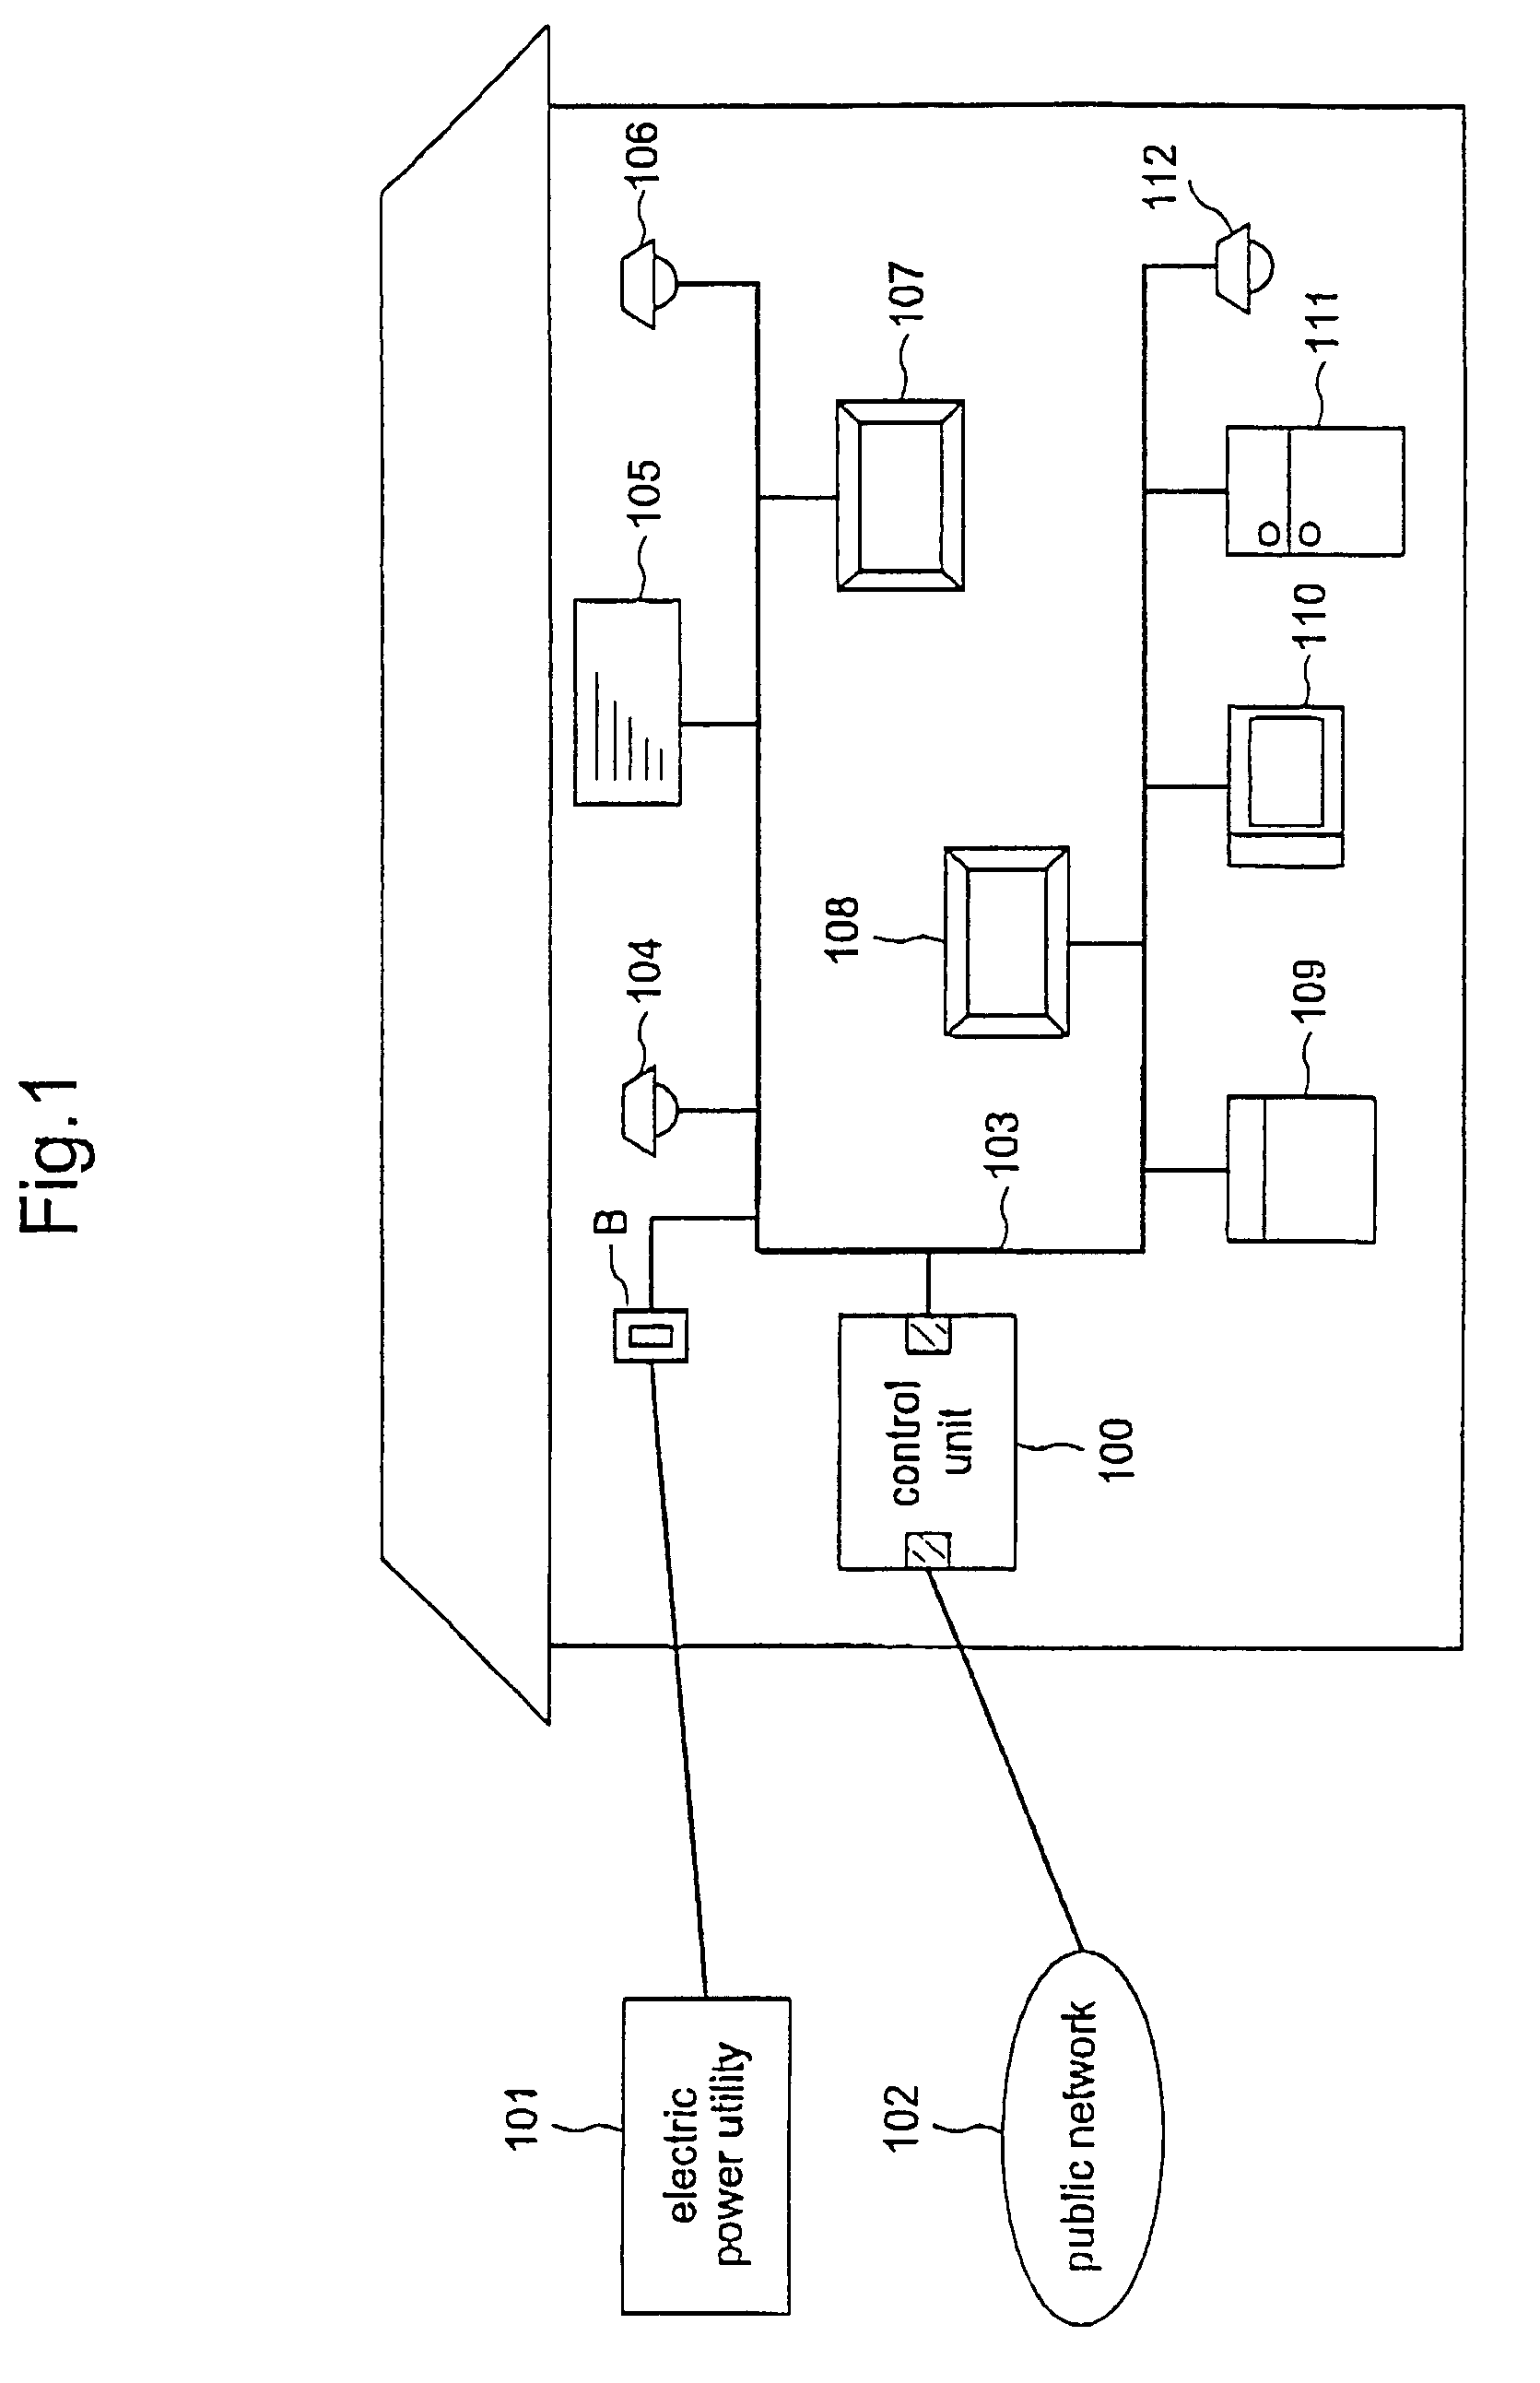 Control apparatus and control method for managing communications between multiple electrical appliances through a household power line network